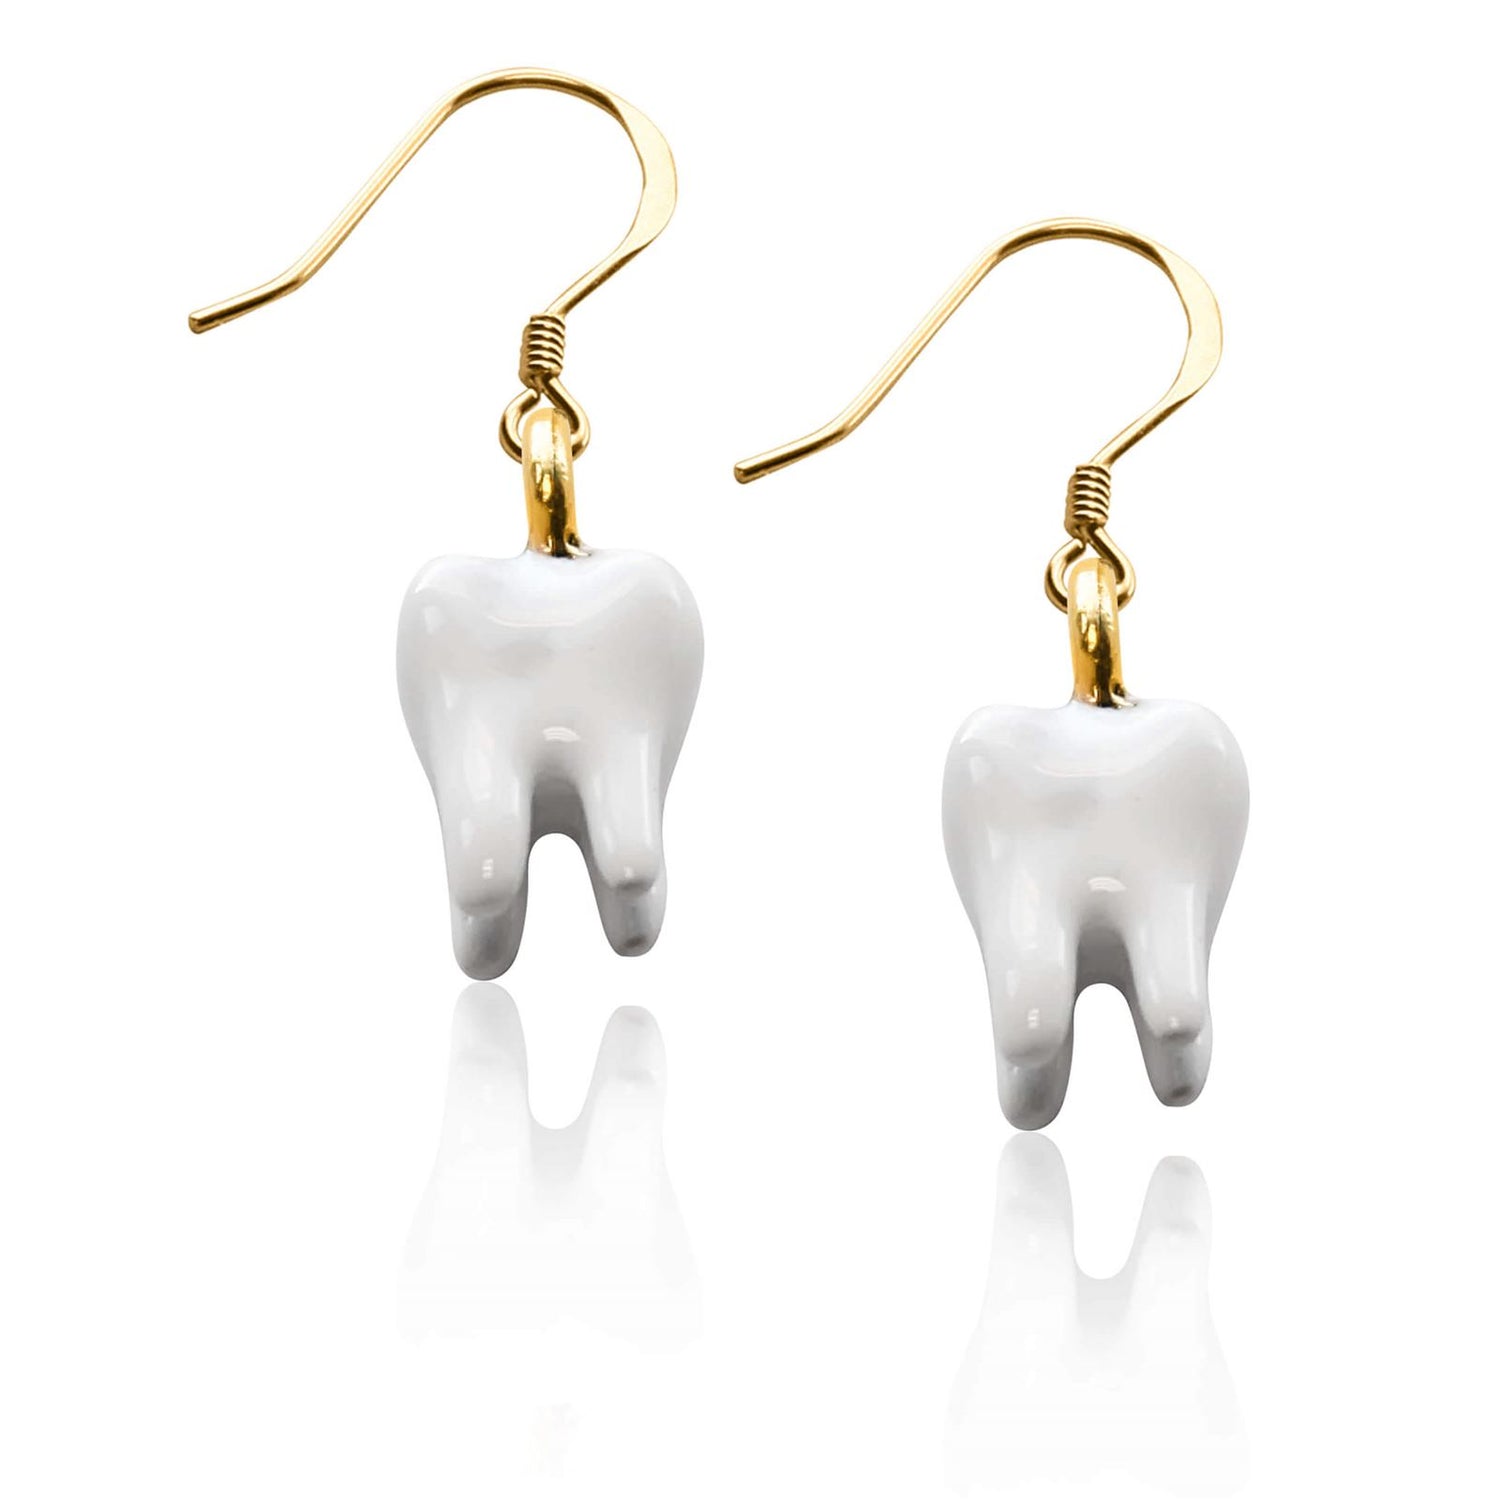 Whimsical Gifts | Tooth Charm Earrings in Gold Finish | Professions Themed | Dental | Medical | First Responder | Jewelry